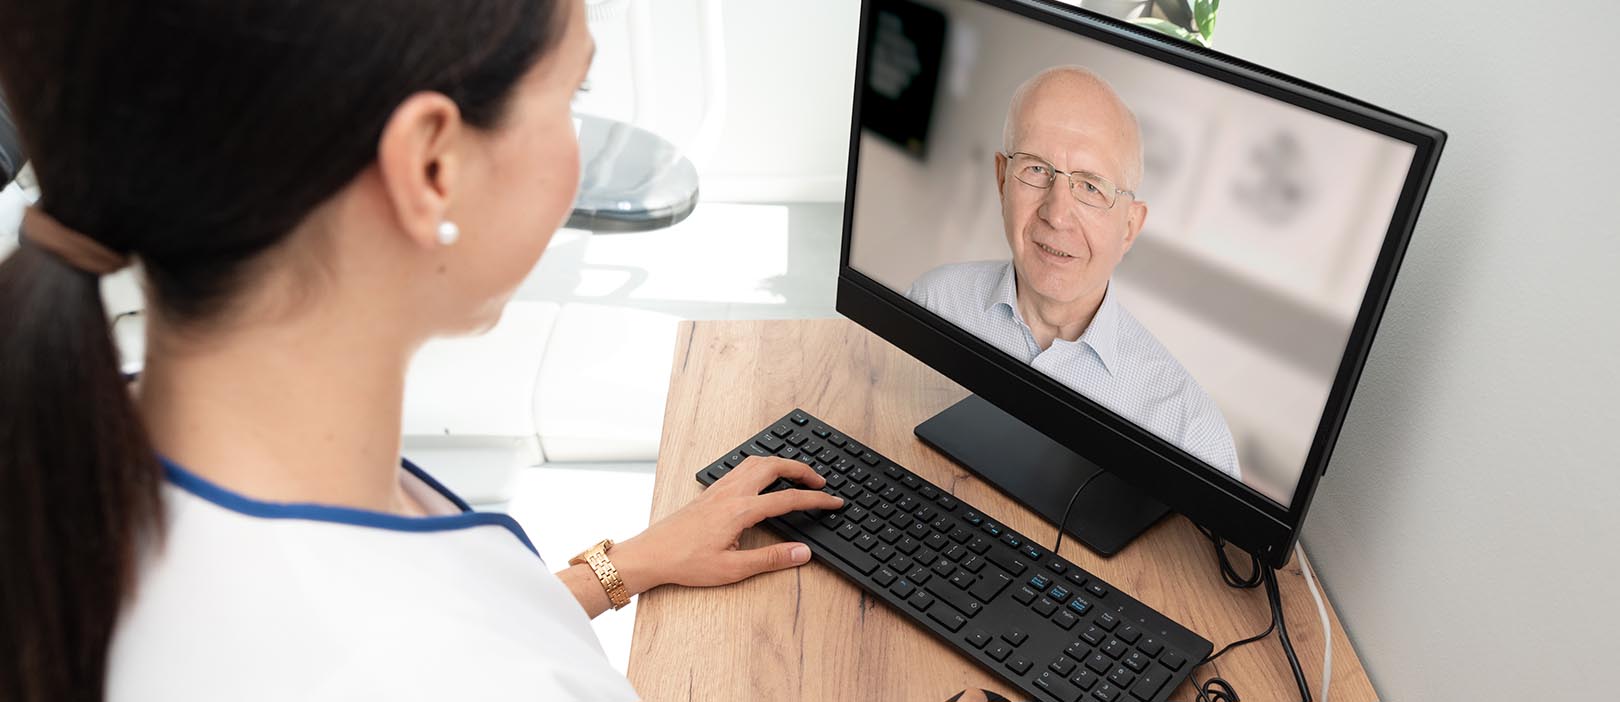 Telemedicine is essential amid the covid-19 crisis and after it